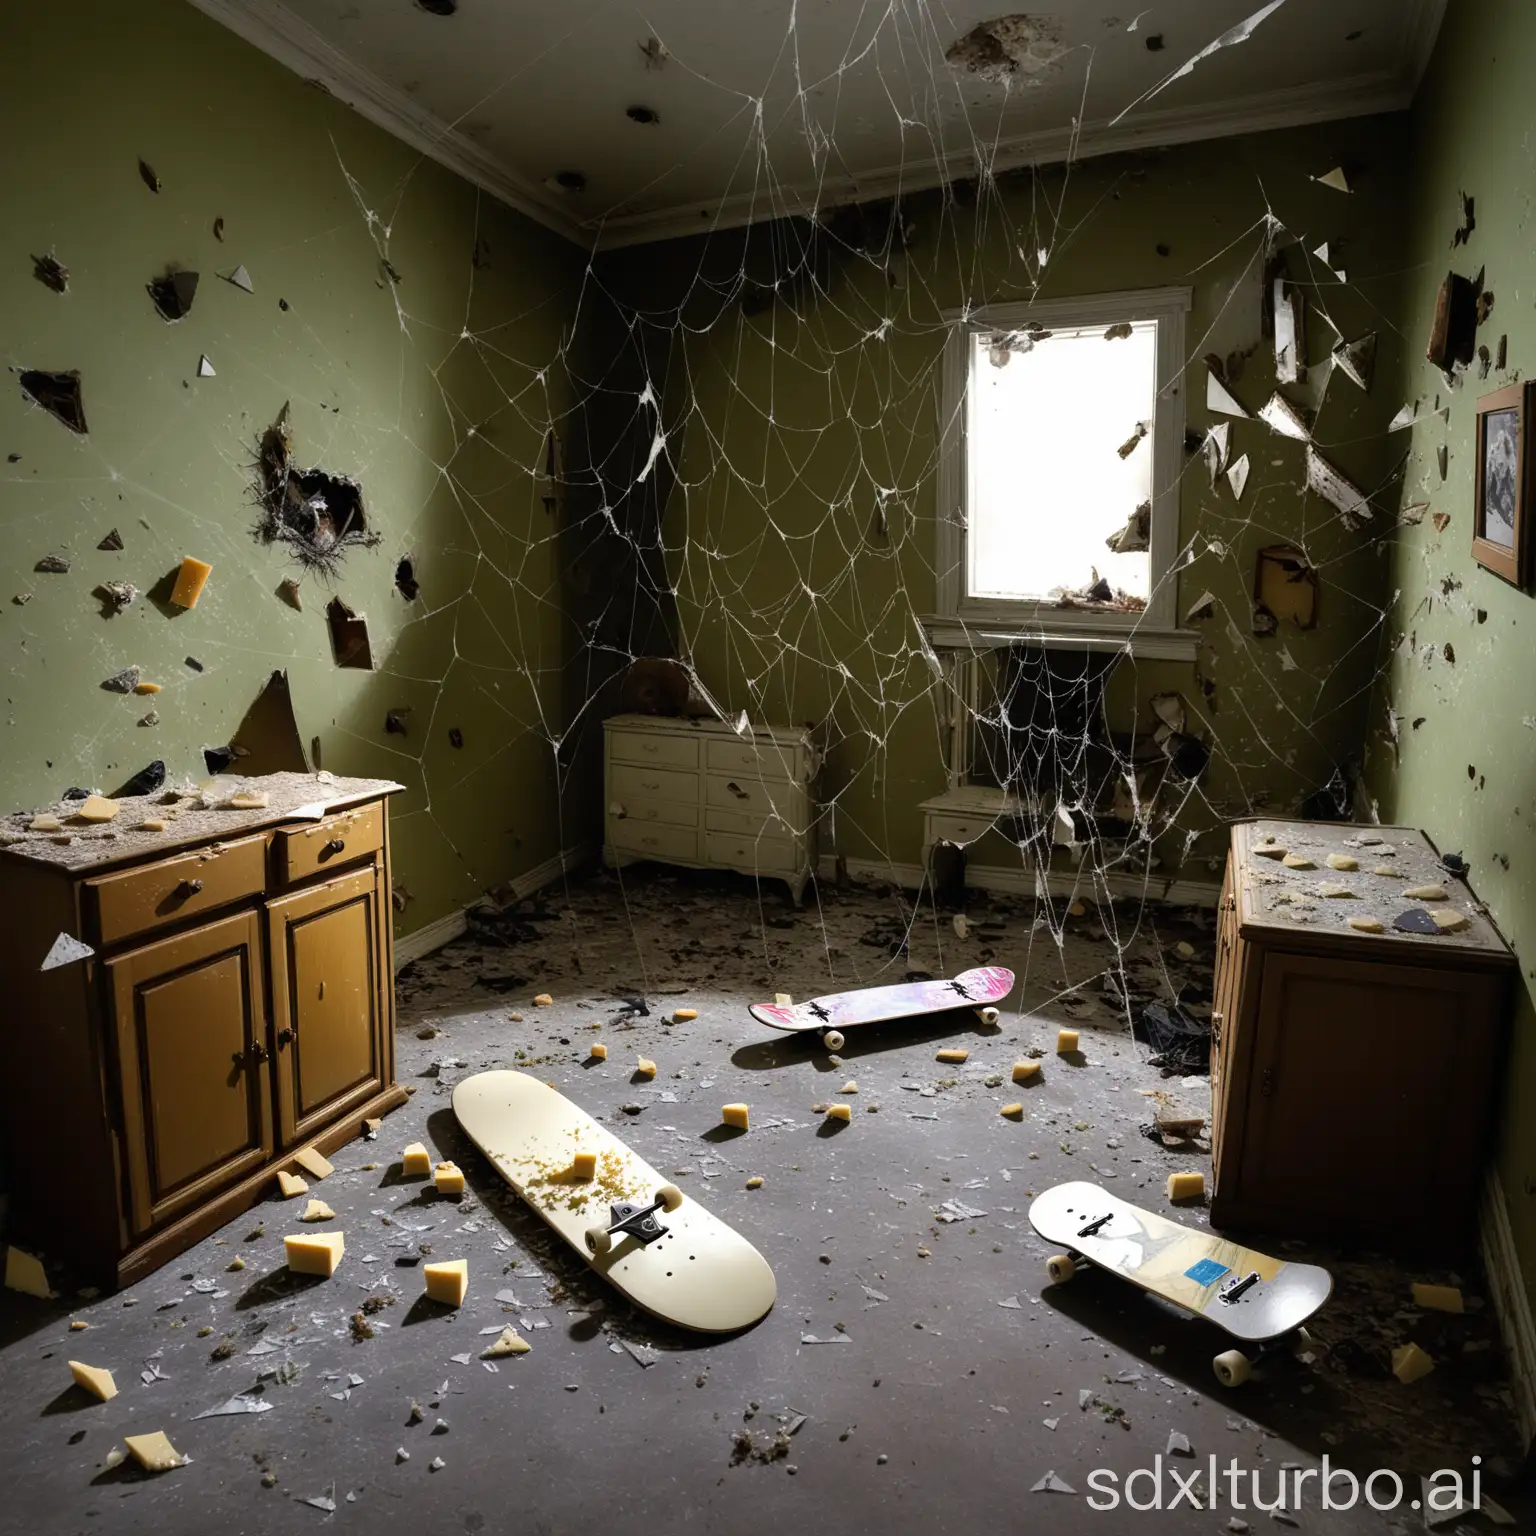 A small room everywhere with spiderwebs. In one corner a dead rat. In the middle of the room a broken skateboard and many shards. A moldy cheese bread. To the right of the wall an old cabinet.